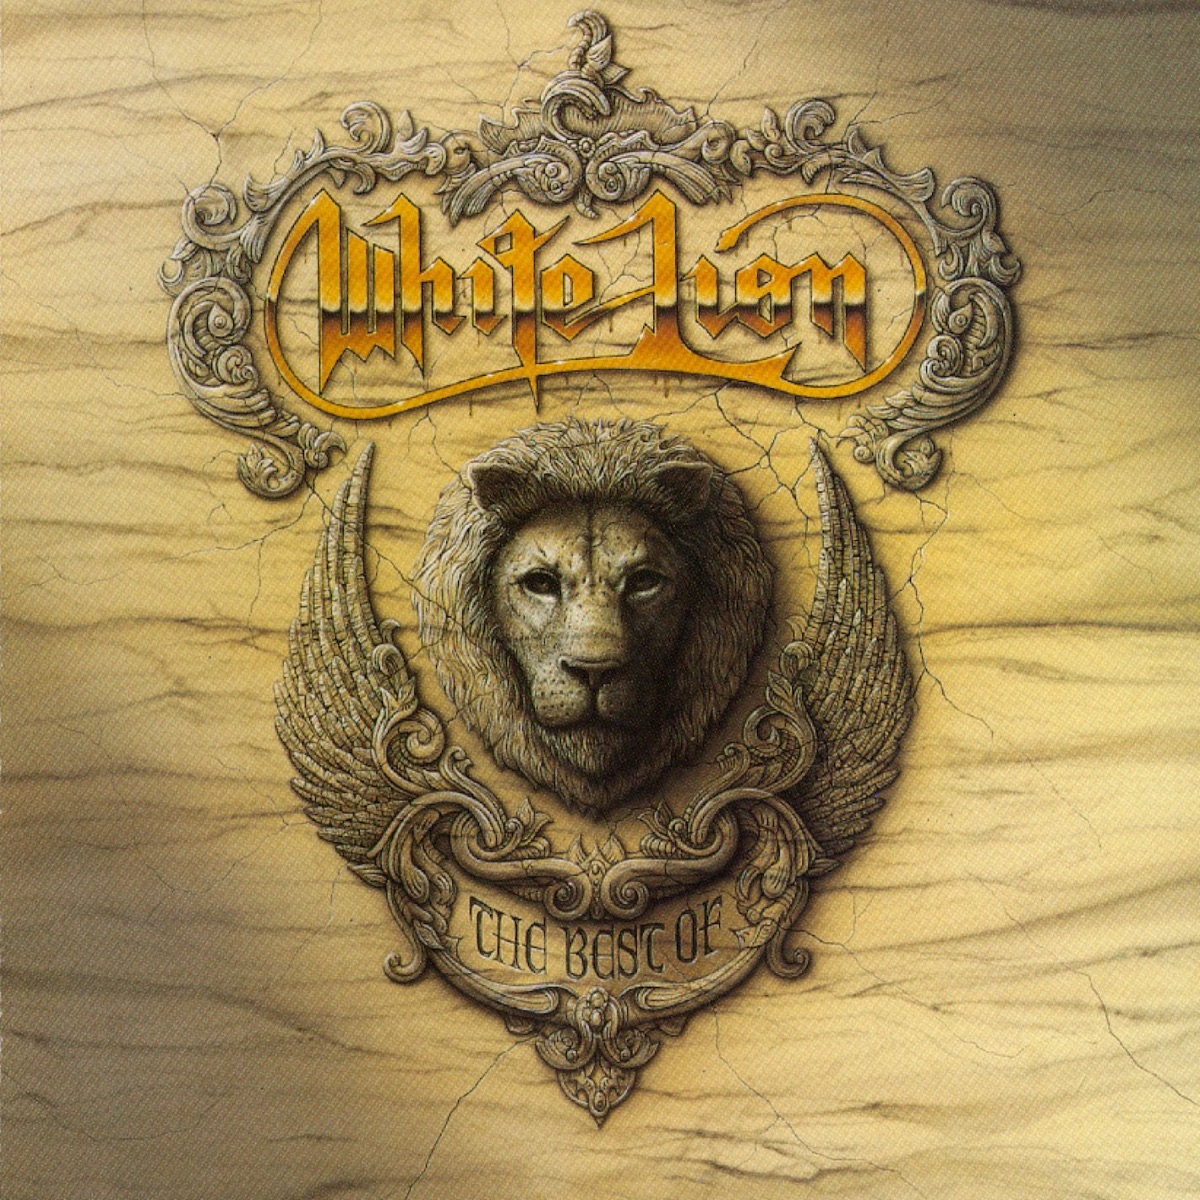 Greatest Hits - White Lion - Album by White Lion - Apple Music